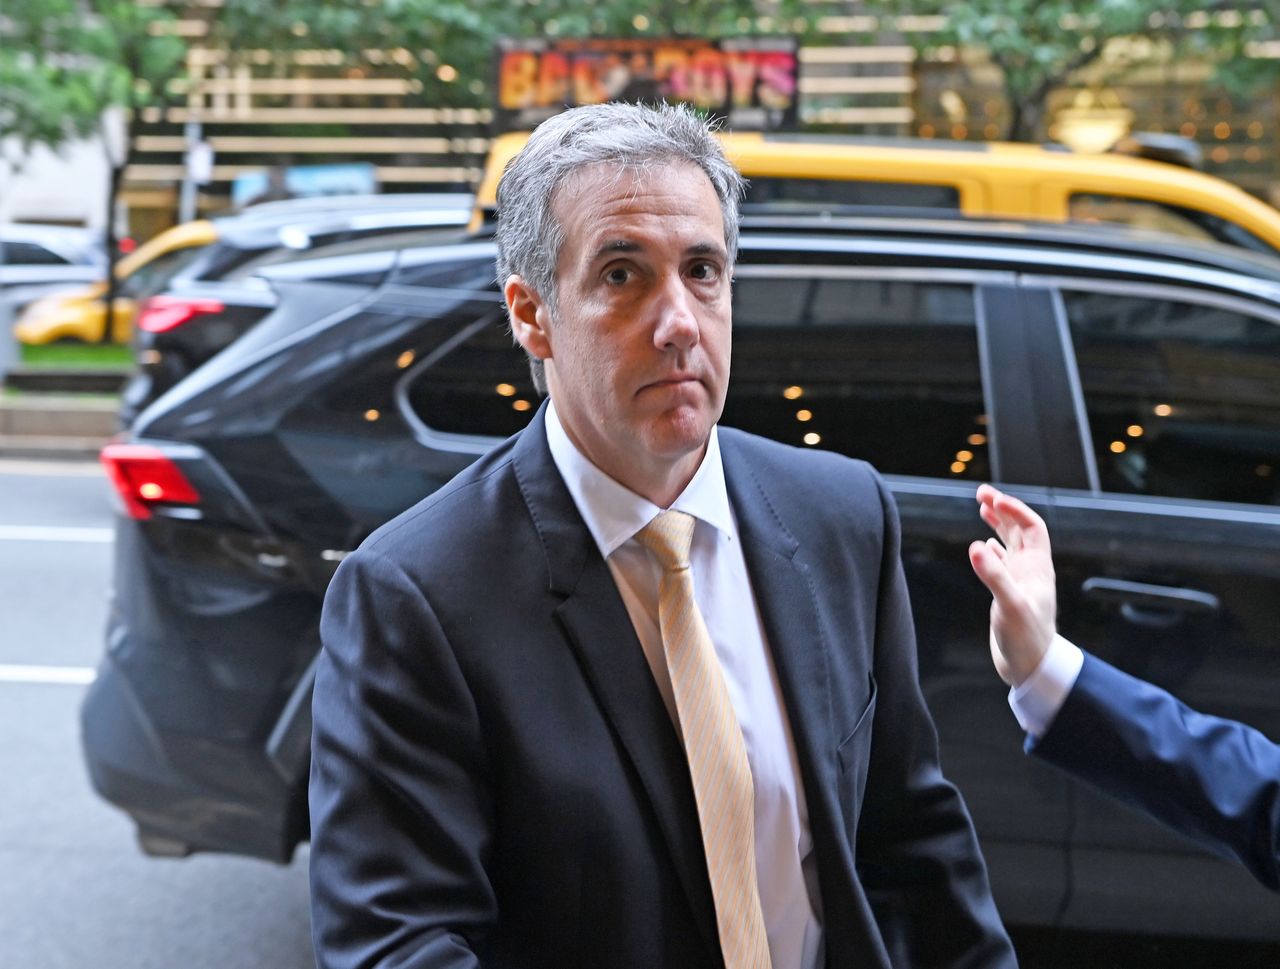 NEW YORK, NY - MAY 16: Michael Cohen is seen on May 16, 2024 in New York City. (Photo by Andrea Renault/Star Max/GC Images)